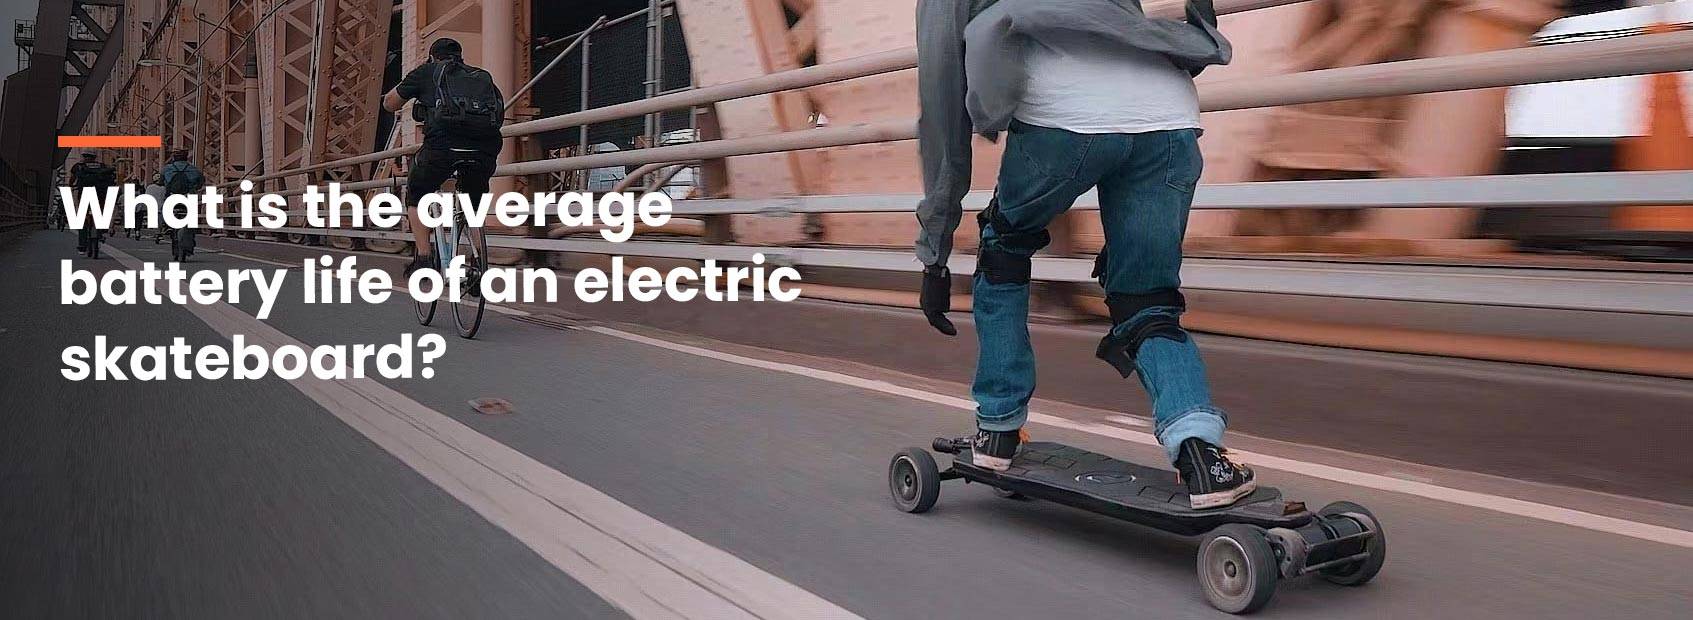 What is the average battery life of an electric skateboard?